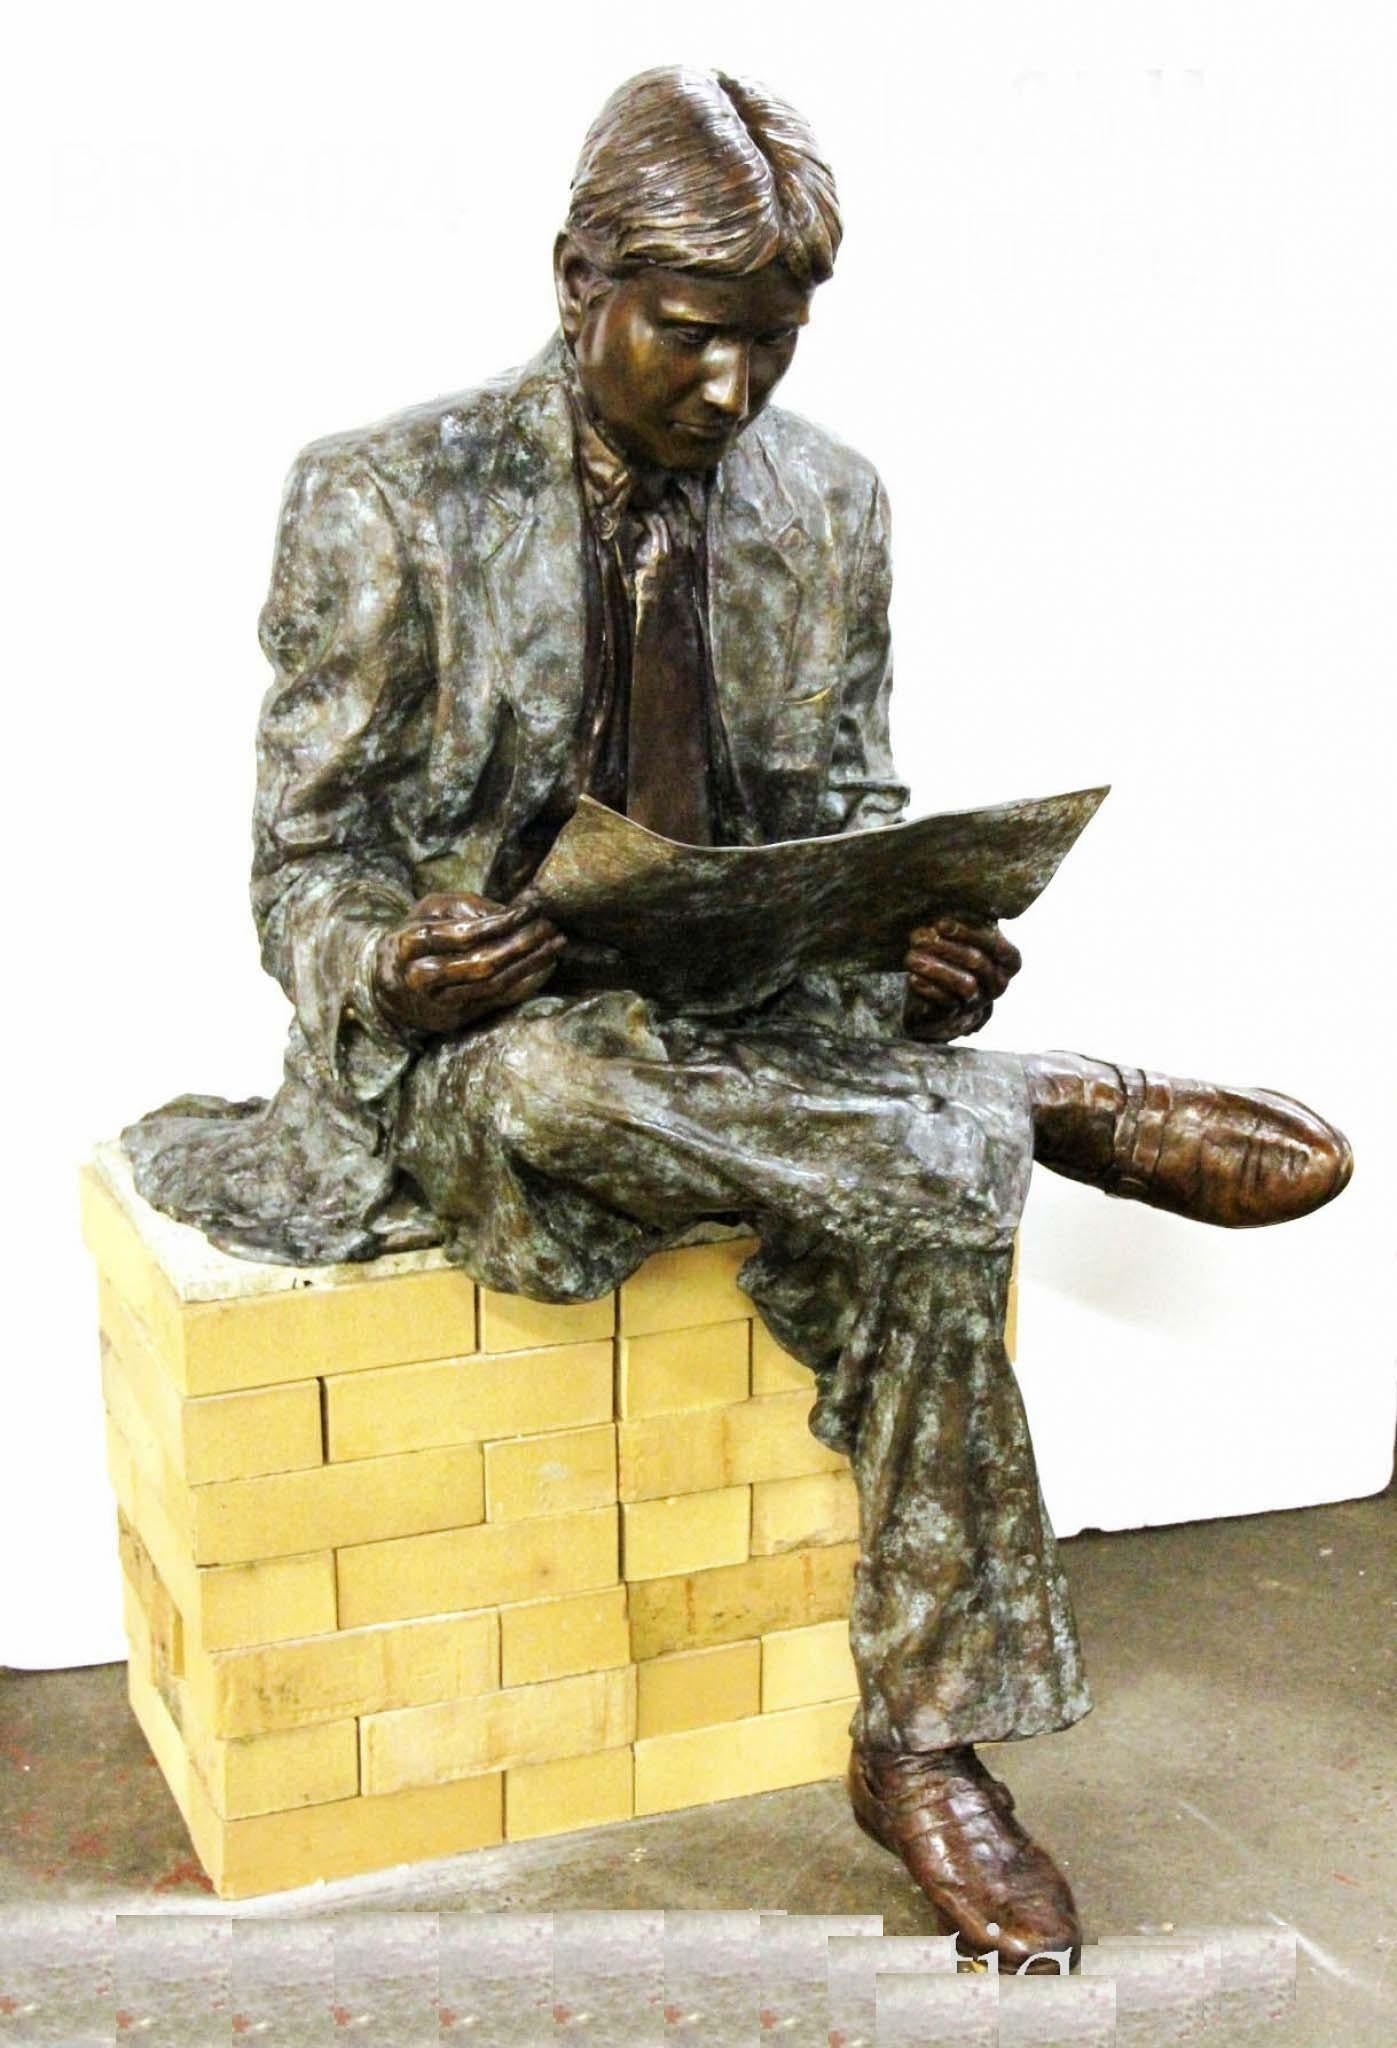 Quirky large bronze casting of a 1930s style Oxford University student
Just over four feet tall - 125  CM - so good size
Of course being bronze this can live outside with no fear of rusting
Quirky collectors piece
Note if you would like to view in